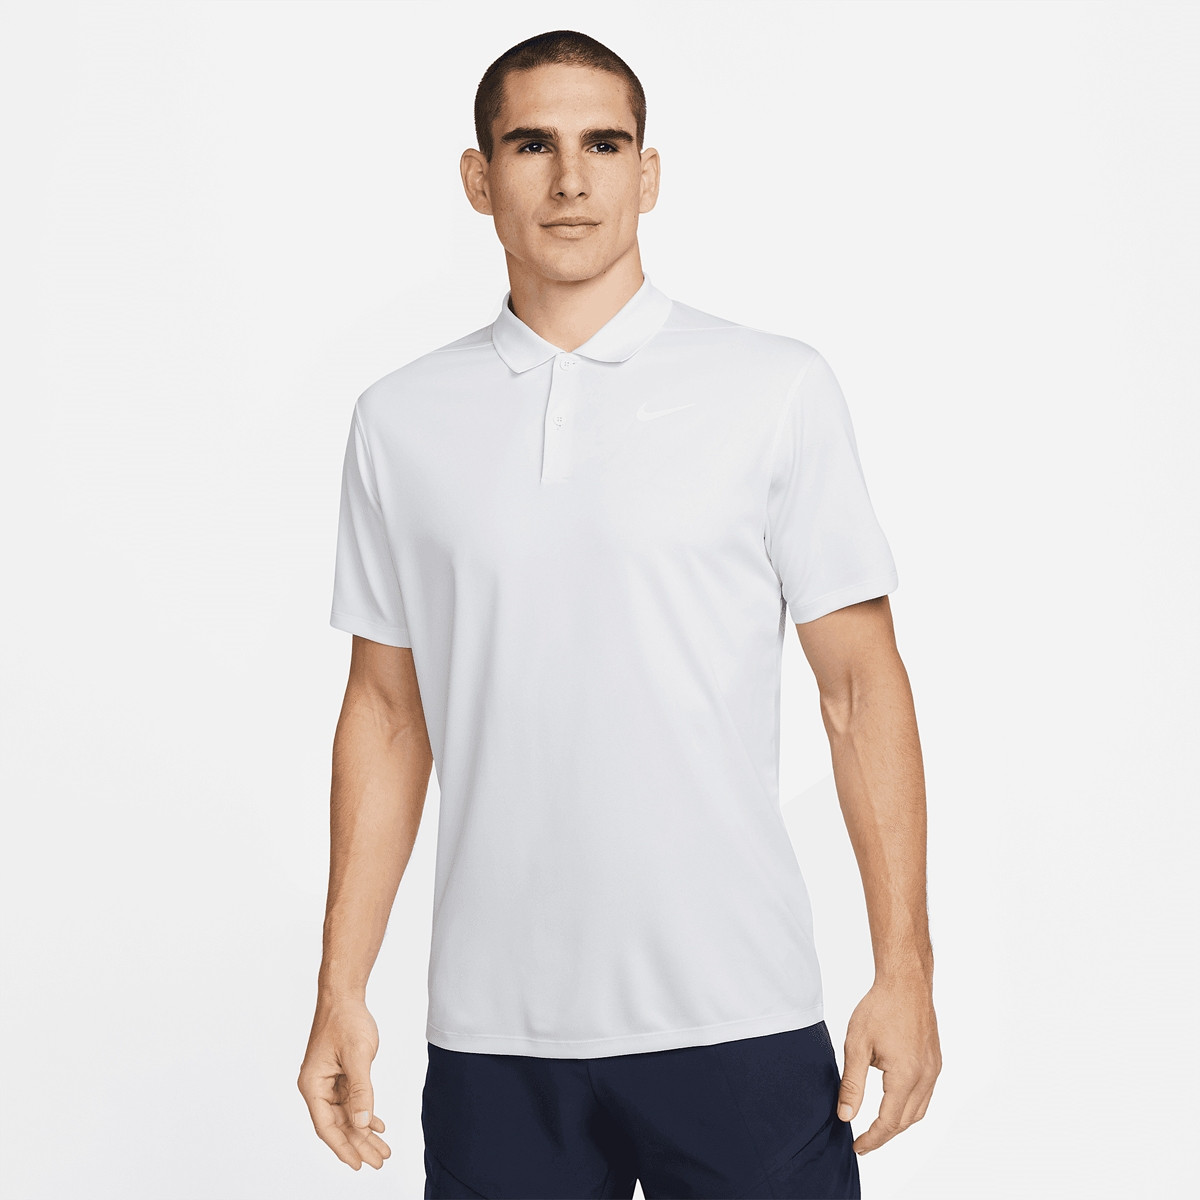 POLO NIKE COURT DRI-FIT PIQUE VICTORY